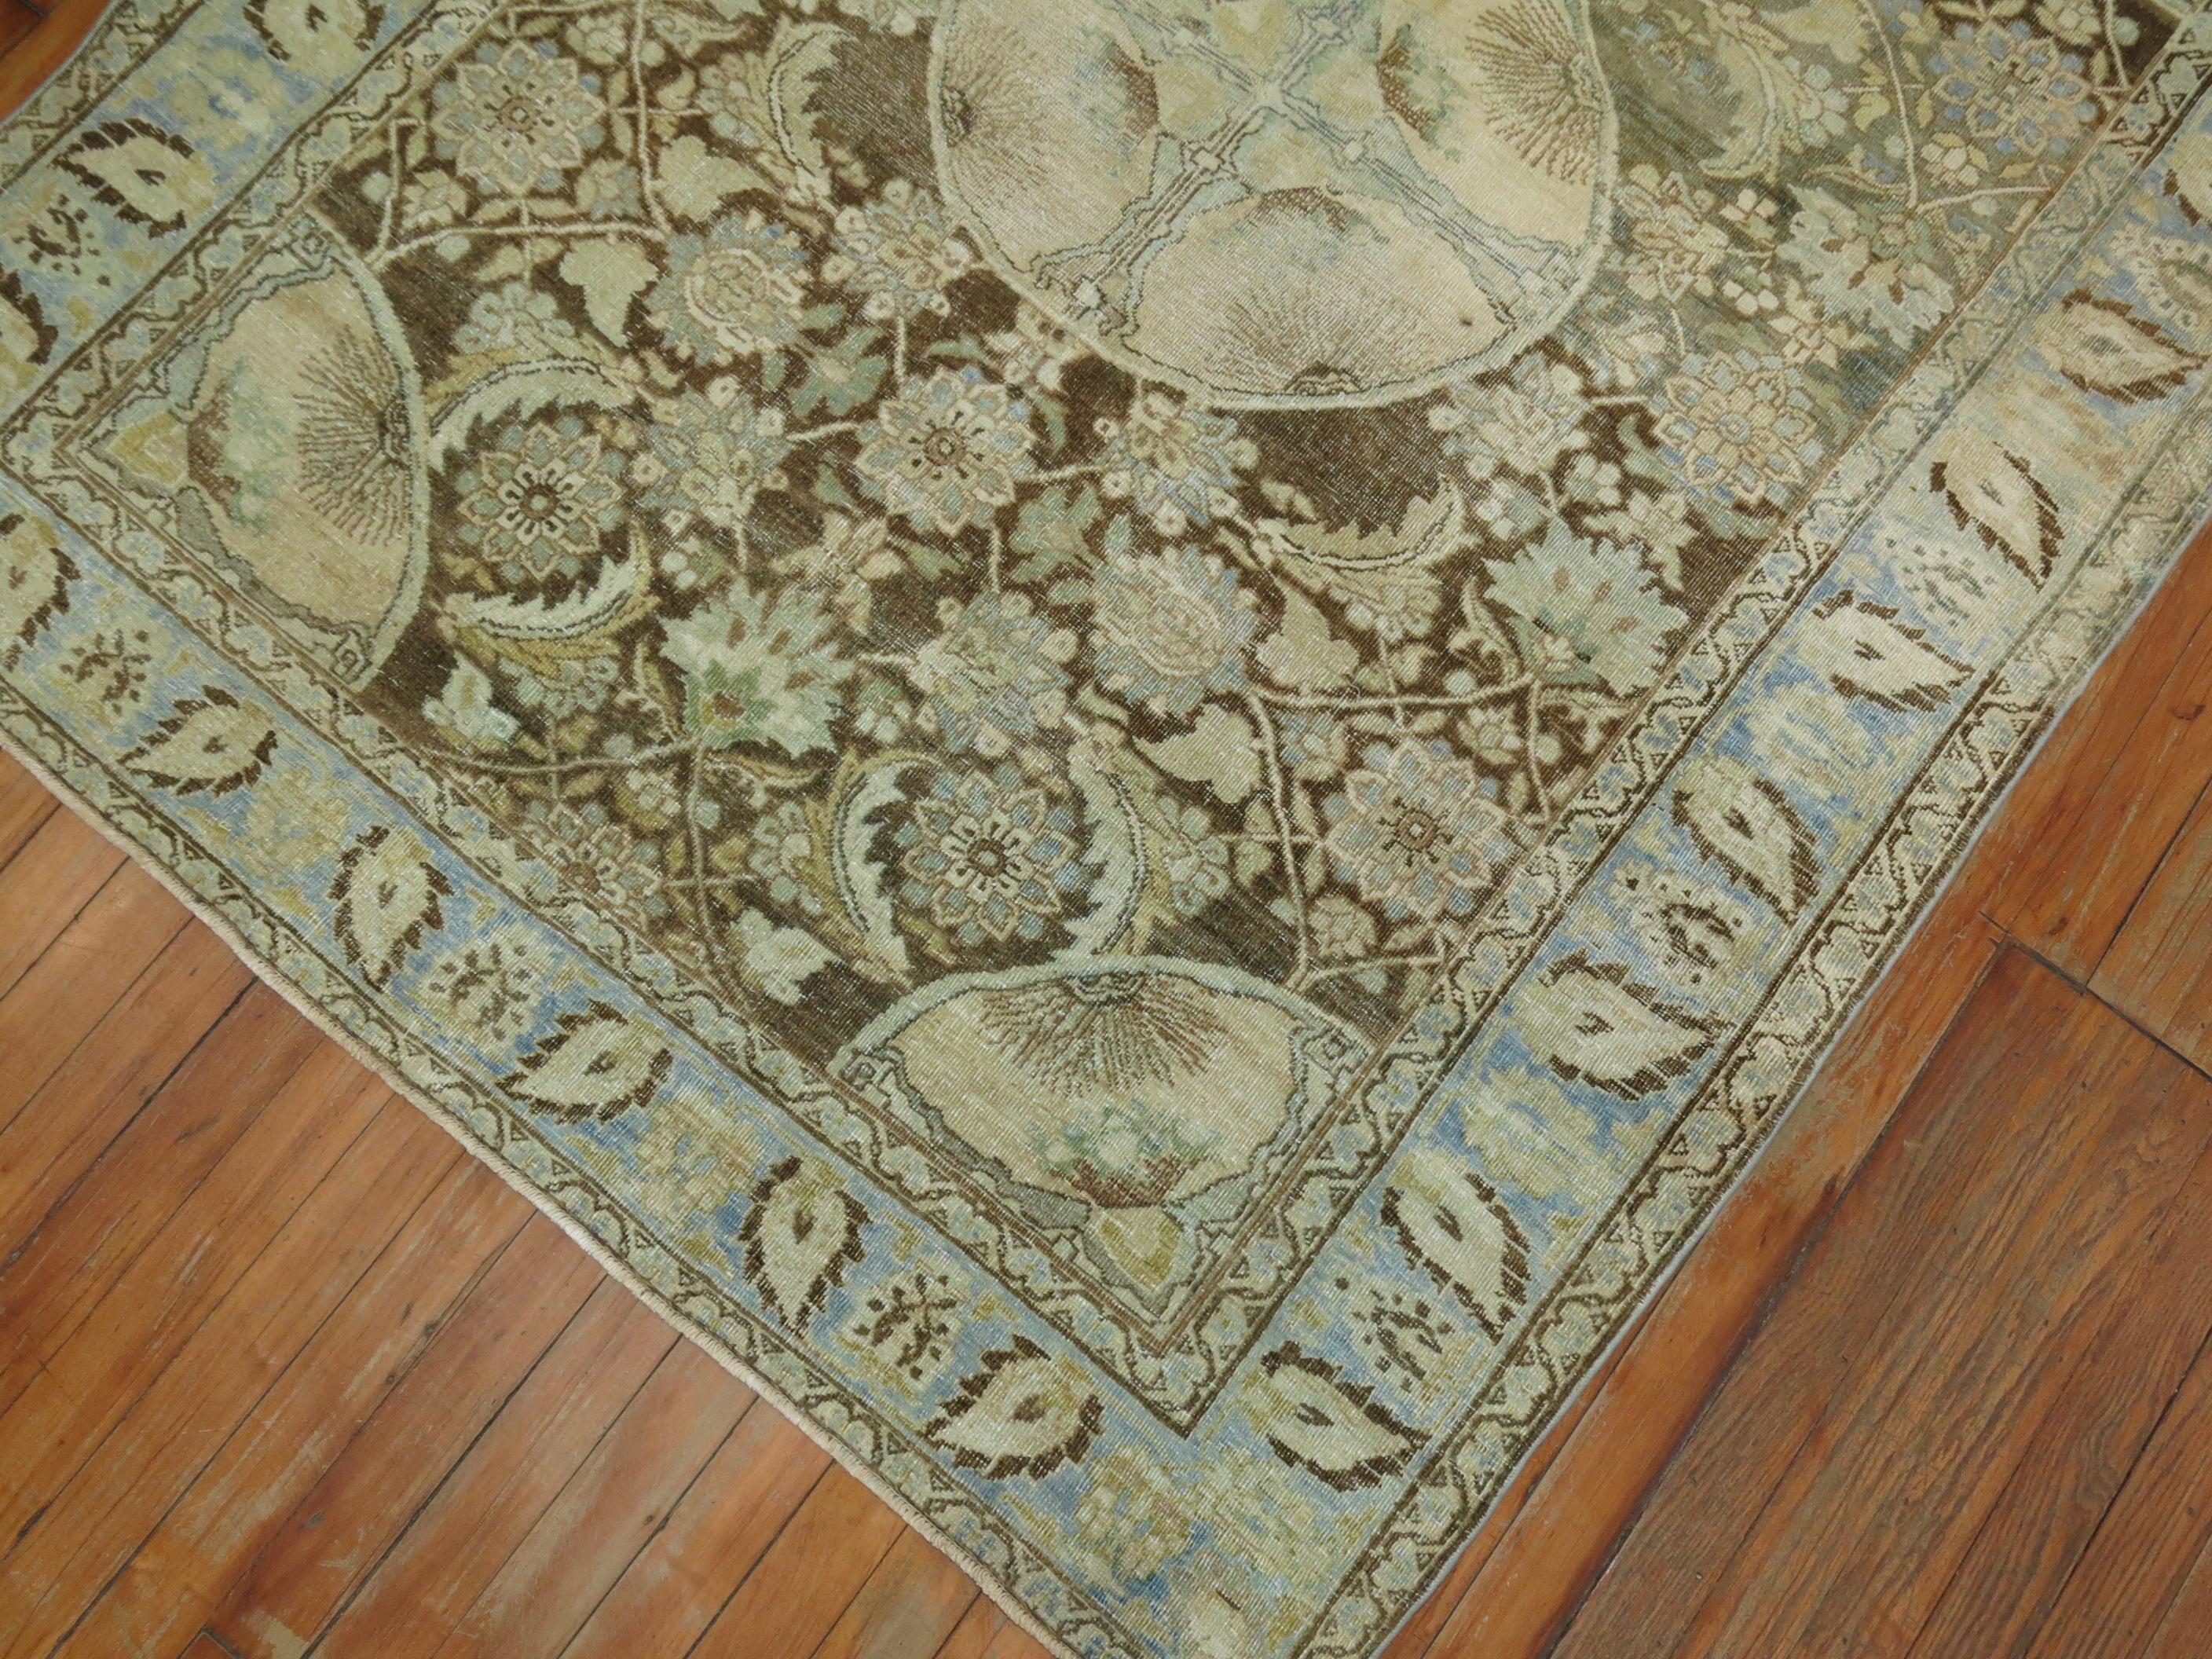 Hand-Woven Eclectic Persian Blue Green Brown Tabriz Oriental Hand Knotted Rug